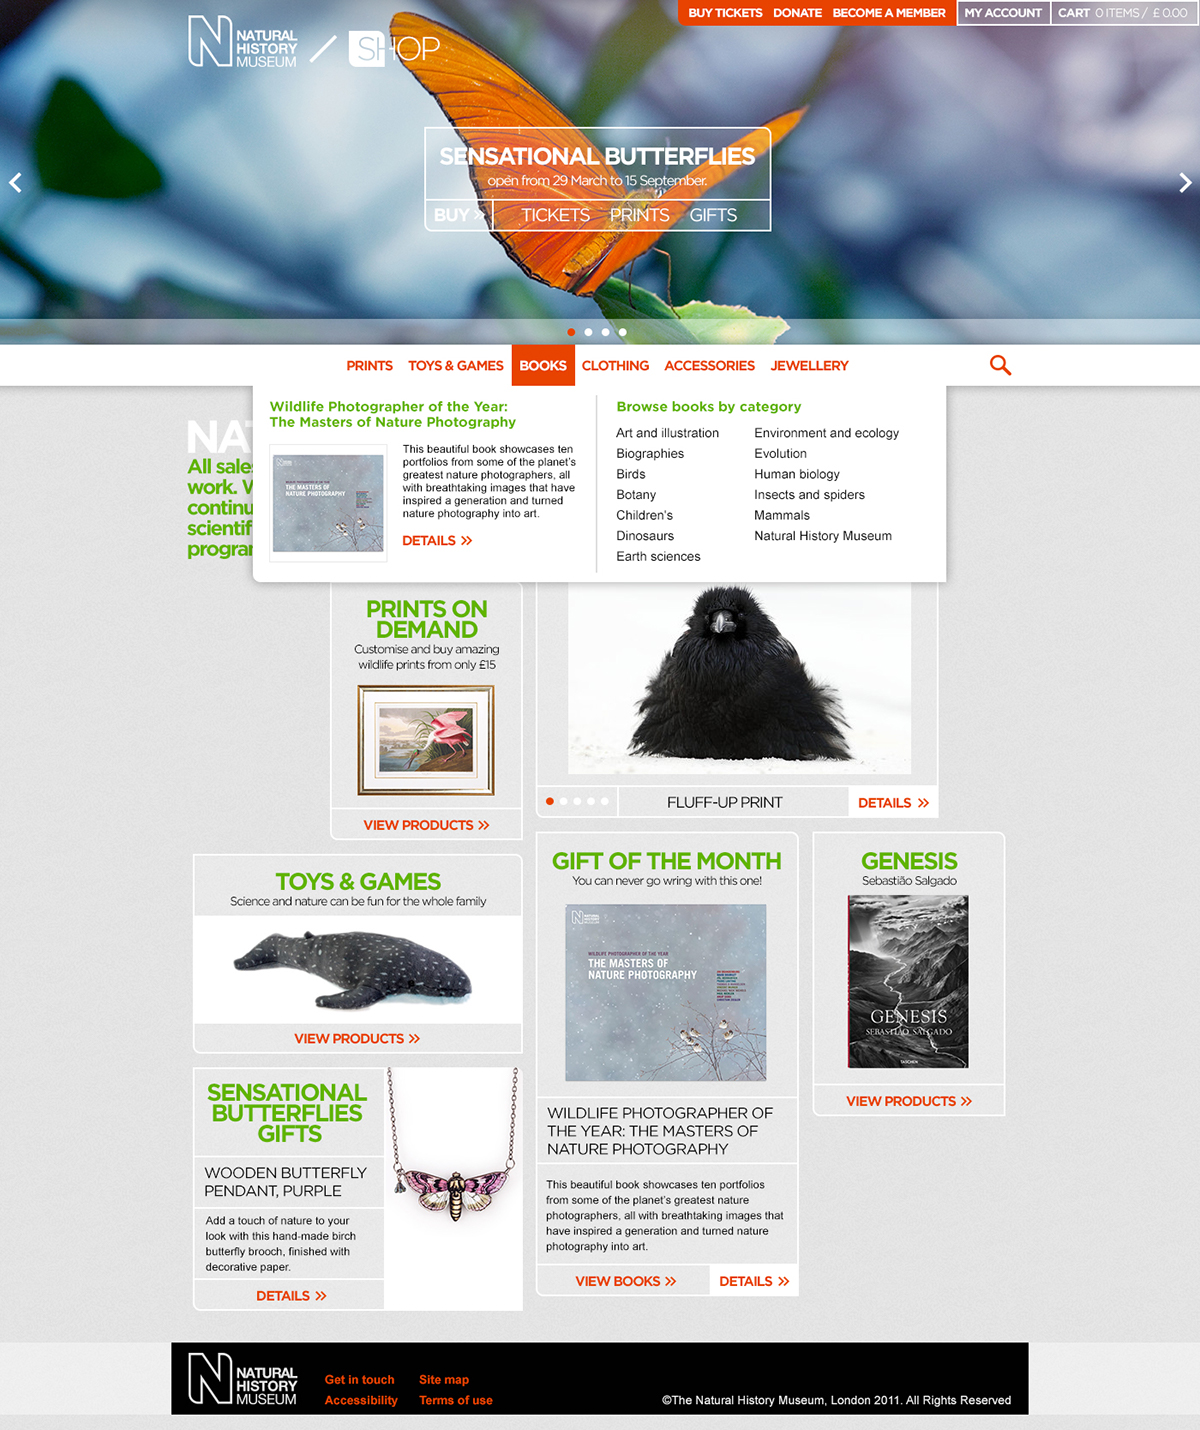 webshop redesign ux UI Responsive museum NHM Webdesign mobile device